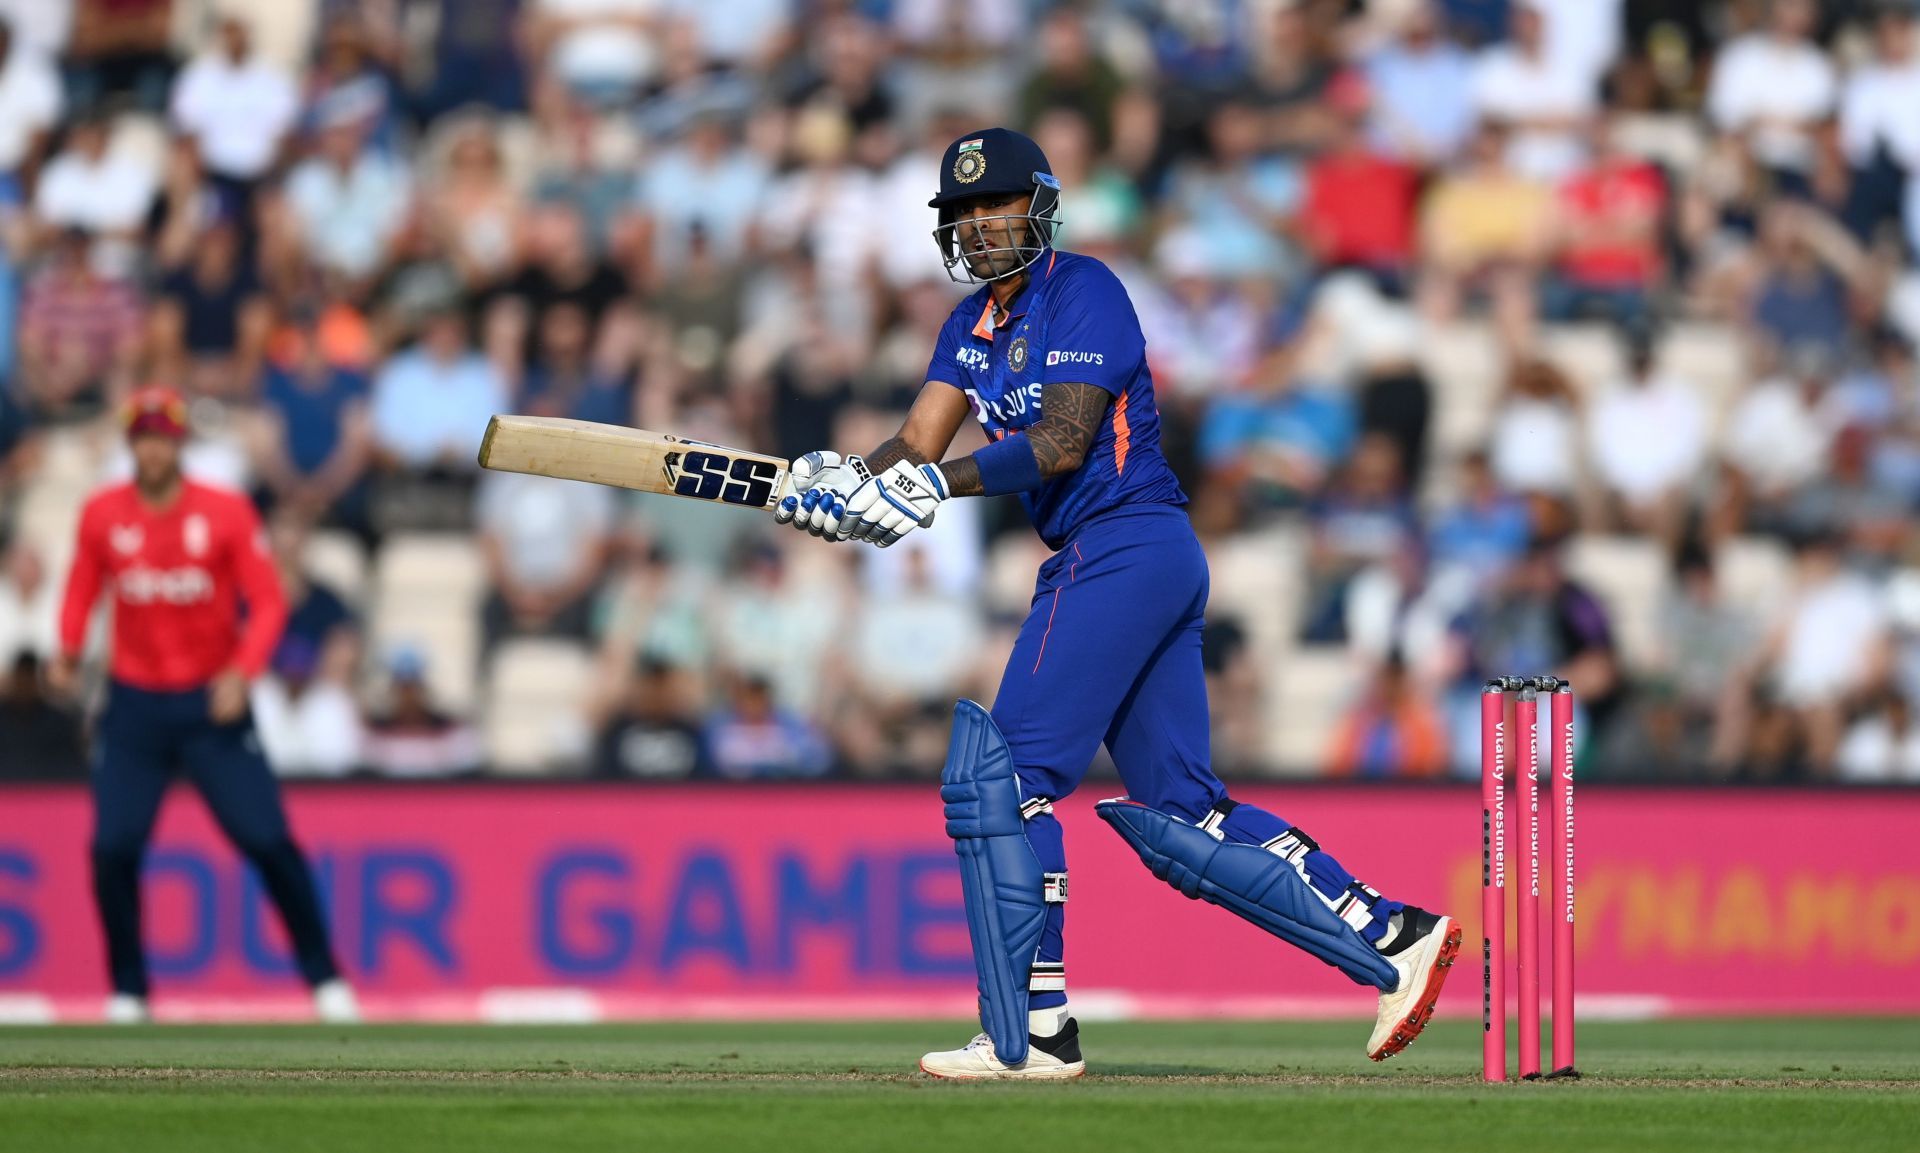 Suryakumar Yadav played an enterprising knock in the first T20I against England